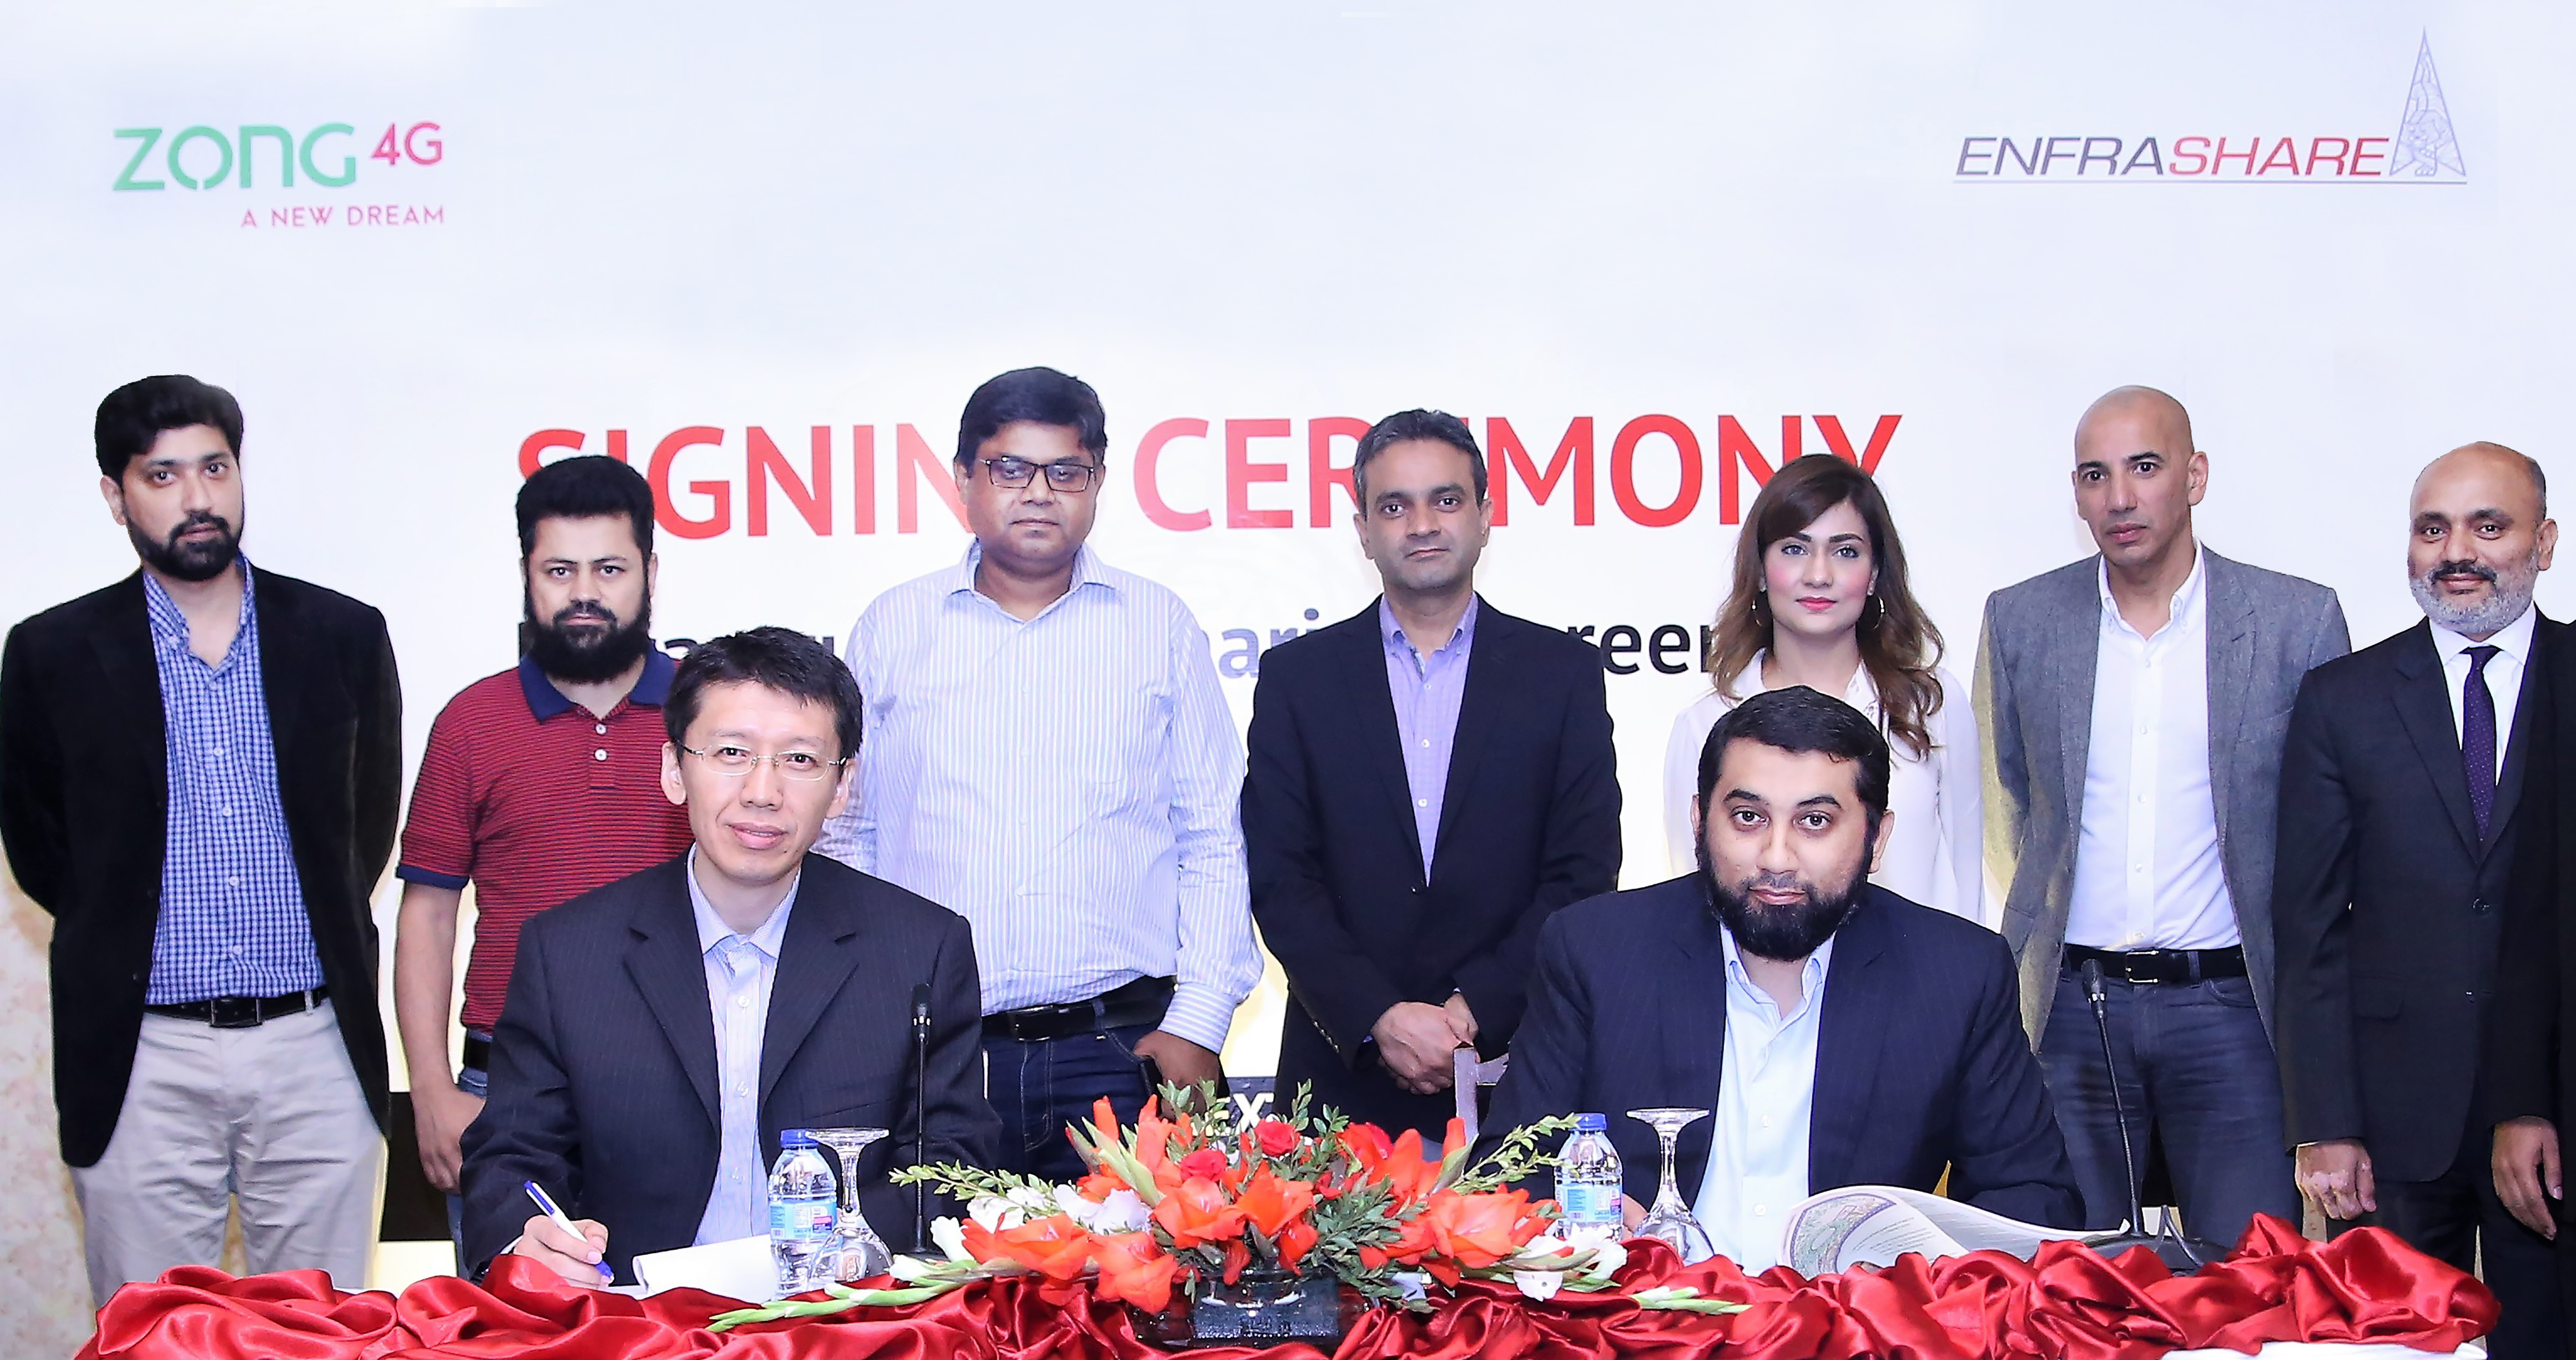 Zong 4G partners with Enfrashare to expand network